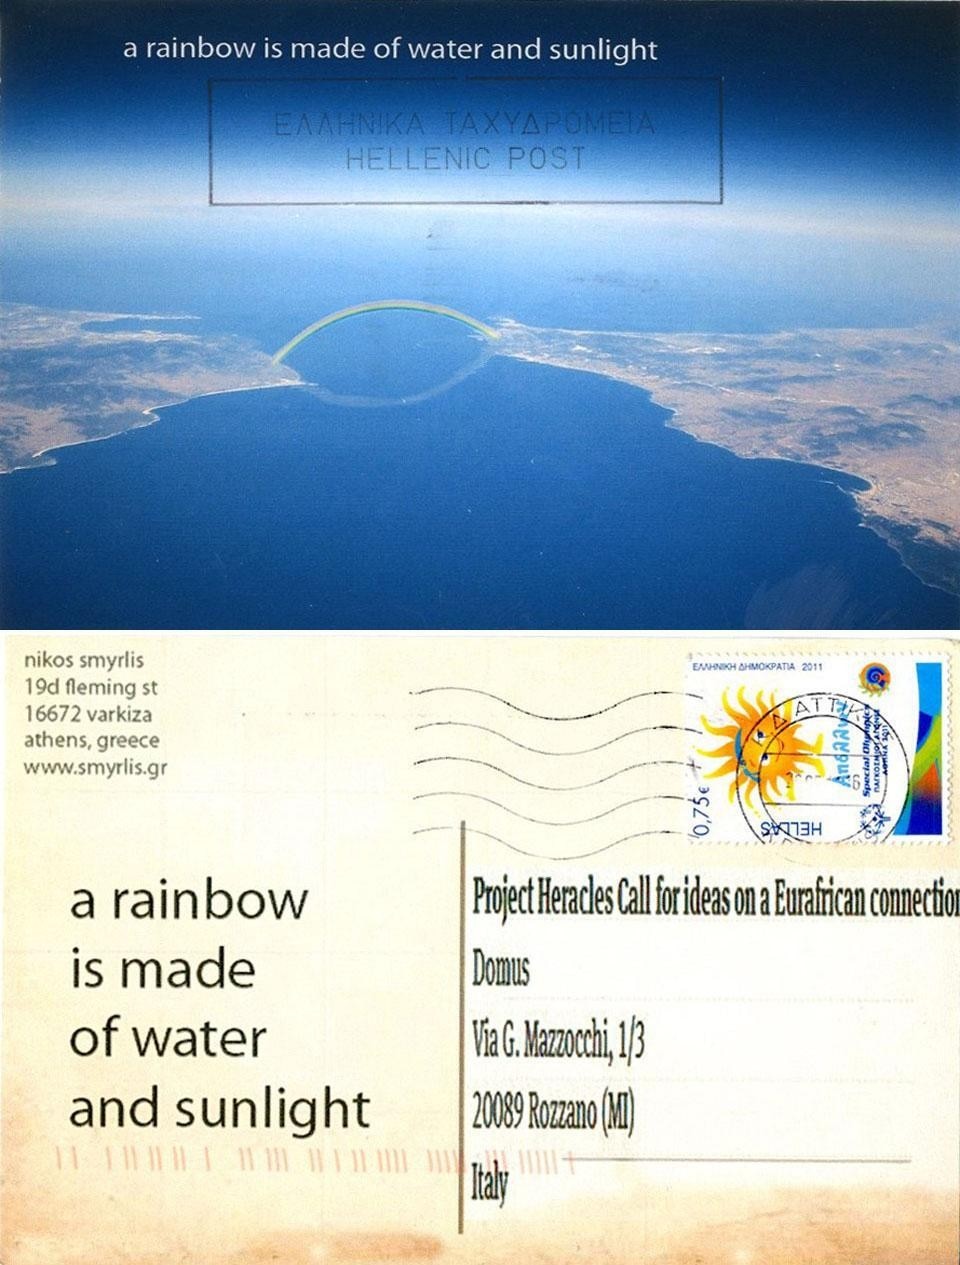 A rainbow is made of water and sunlight, Nikos Smyrlis, Athens (Greece)